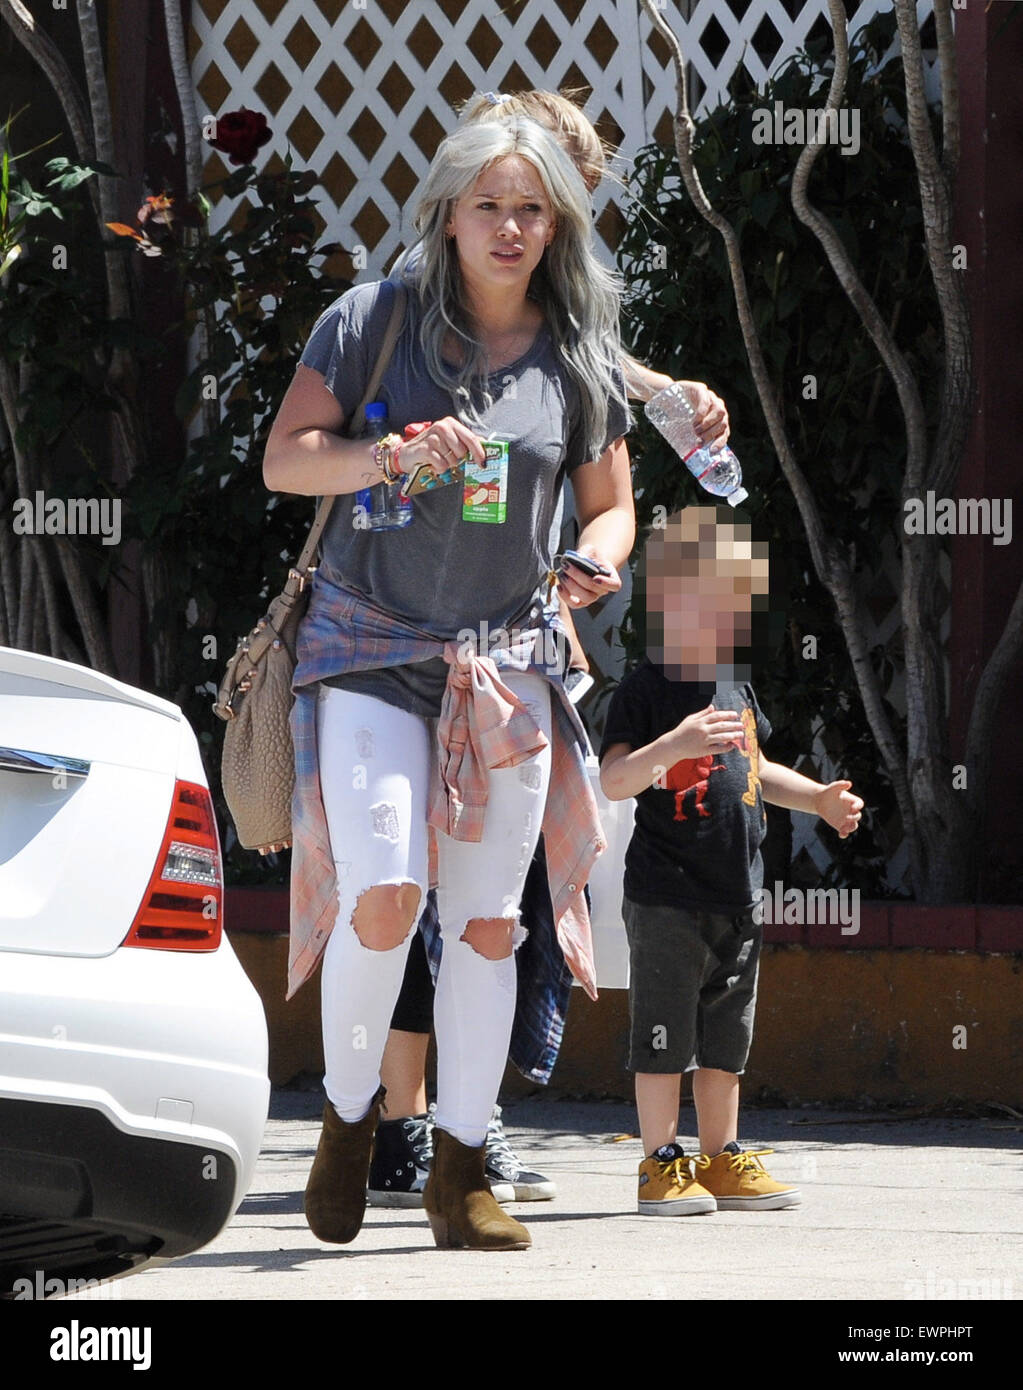 Hilary Duff still sporting her dyed hair, takes her son Luca to The Co-op in Studio City as he was cooled down on a hot spring day, getting sprinkled with bottled water by his nanny  Featuring: Hilary Duff, Luca Comrie Where: Los Angeles, California, United States When: 28 Apr 2015 C Stock Photo